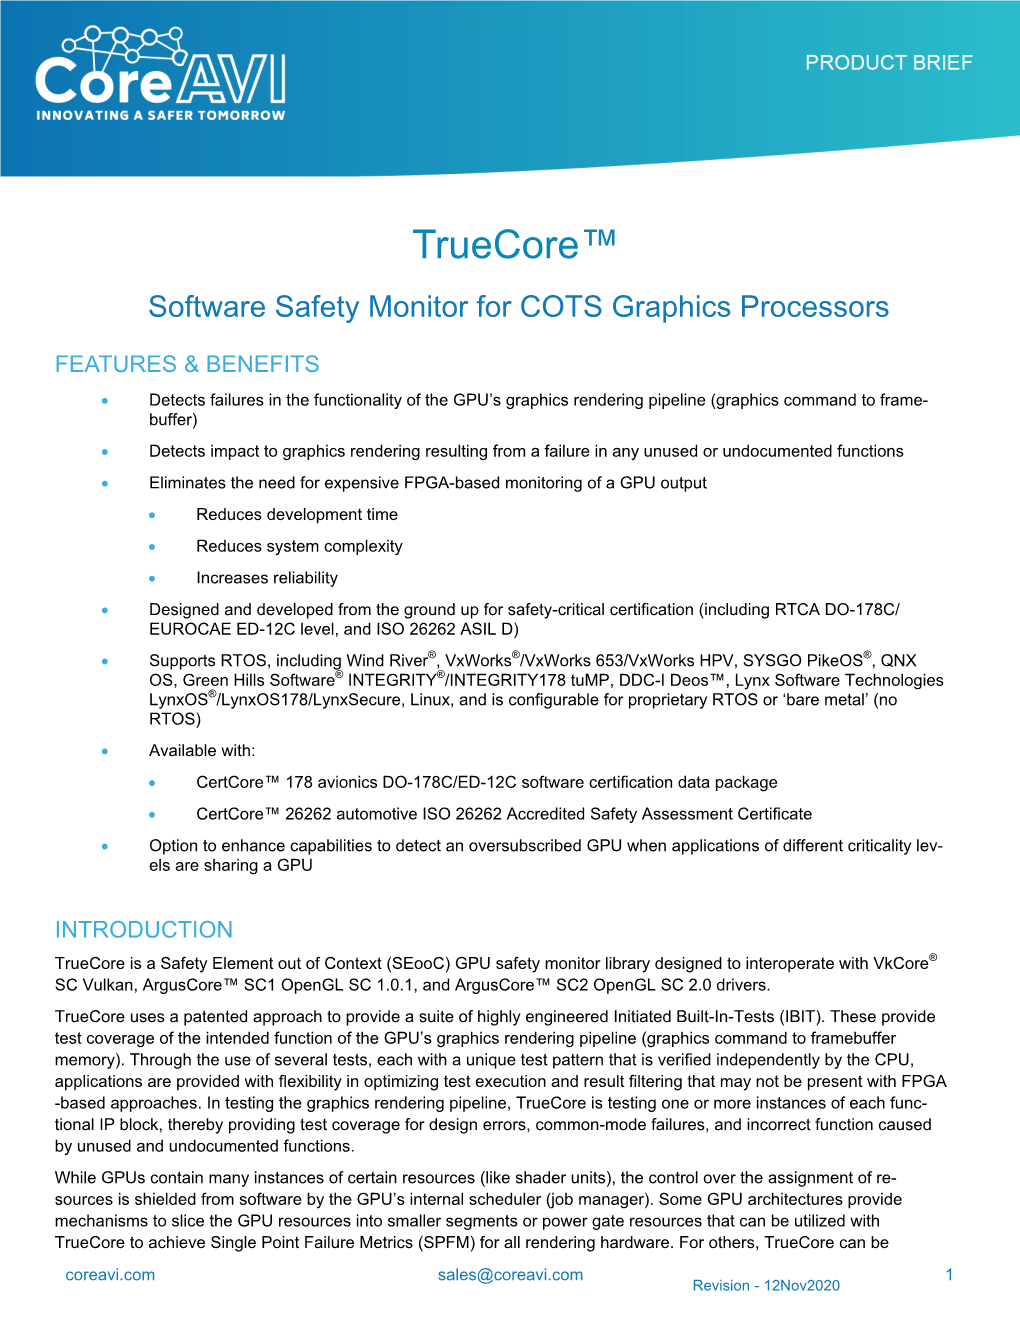 Truecore™ Software Safety Monitor for COTS Graphics Processors